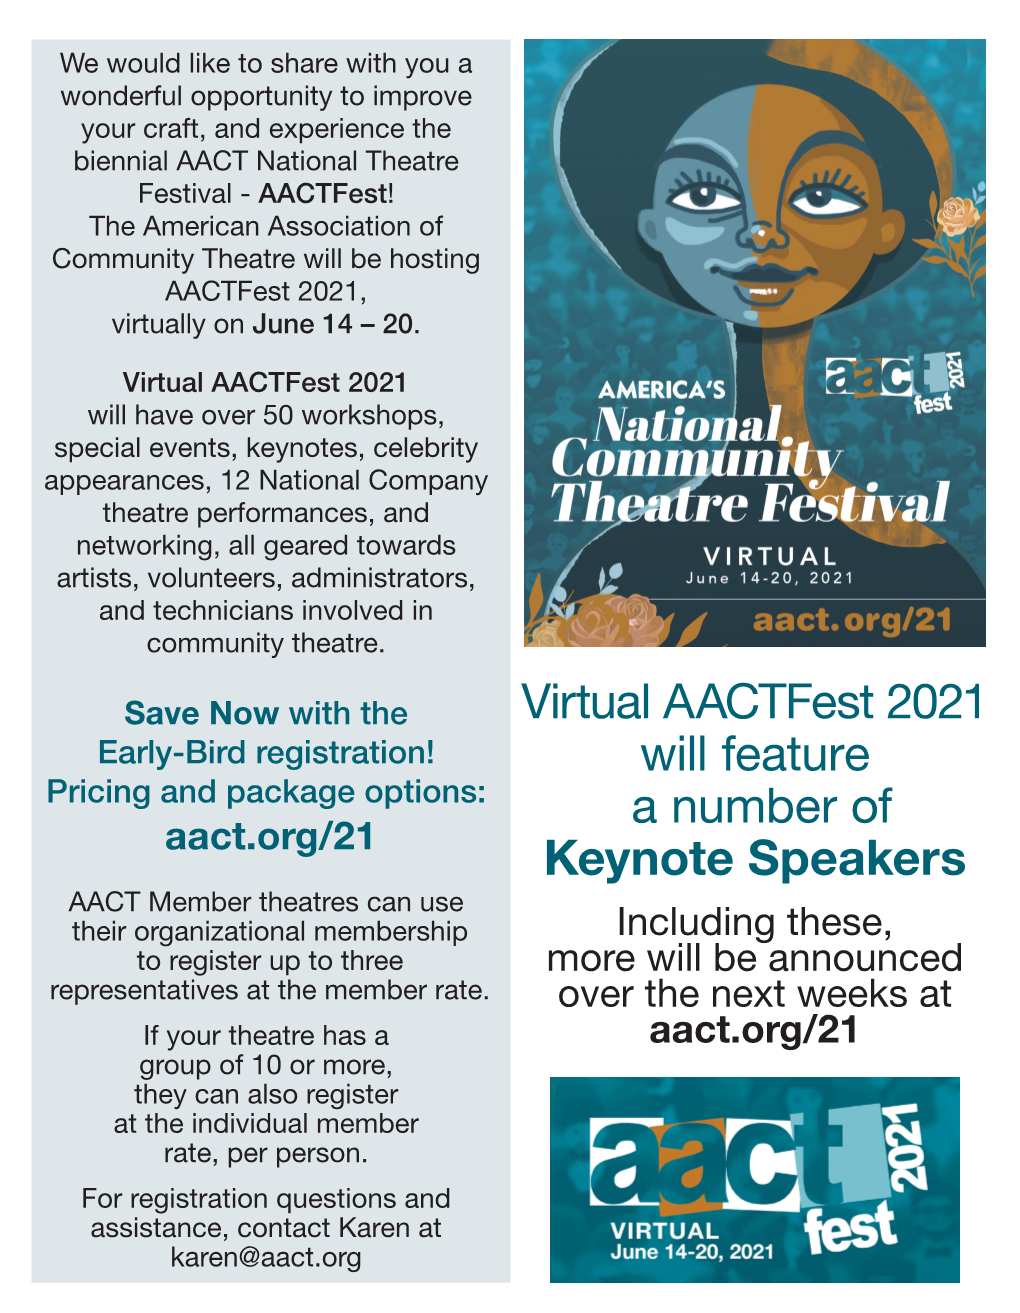 Virtual Aactfest 2021 Will Feature a Number of Keynote Speakers